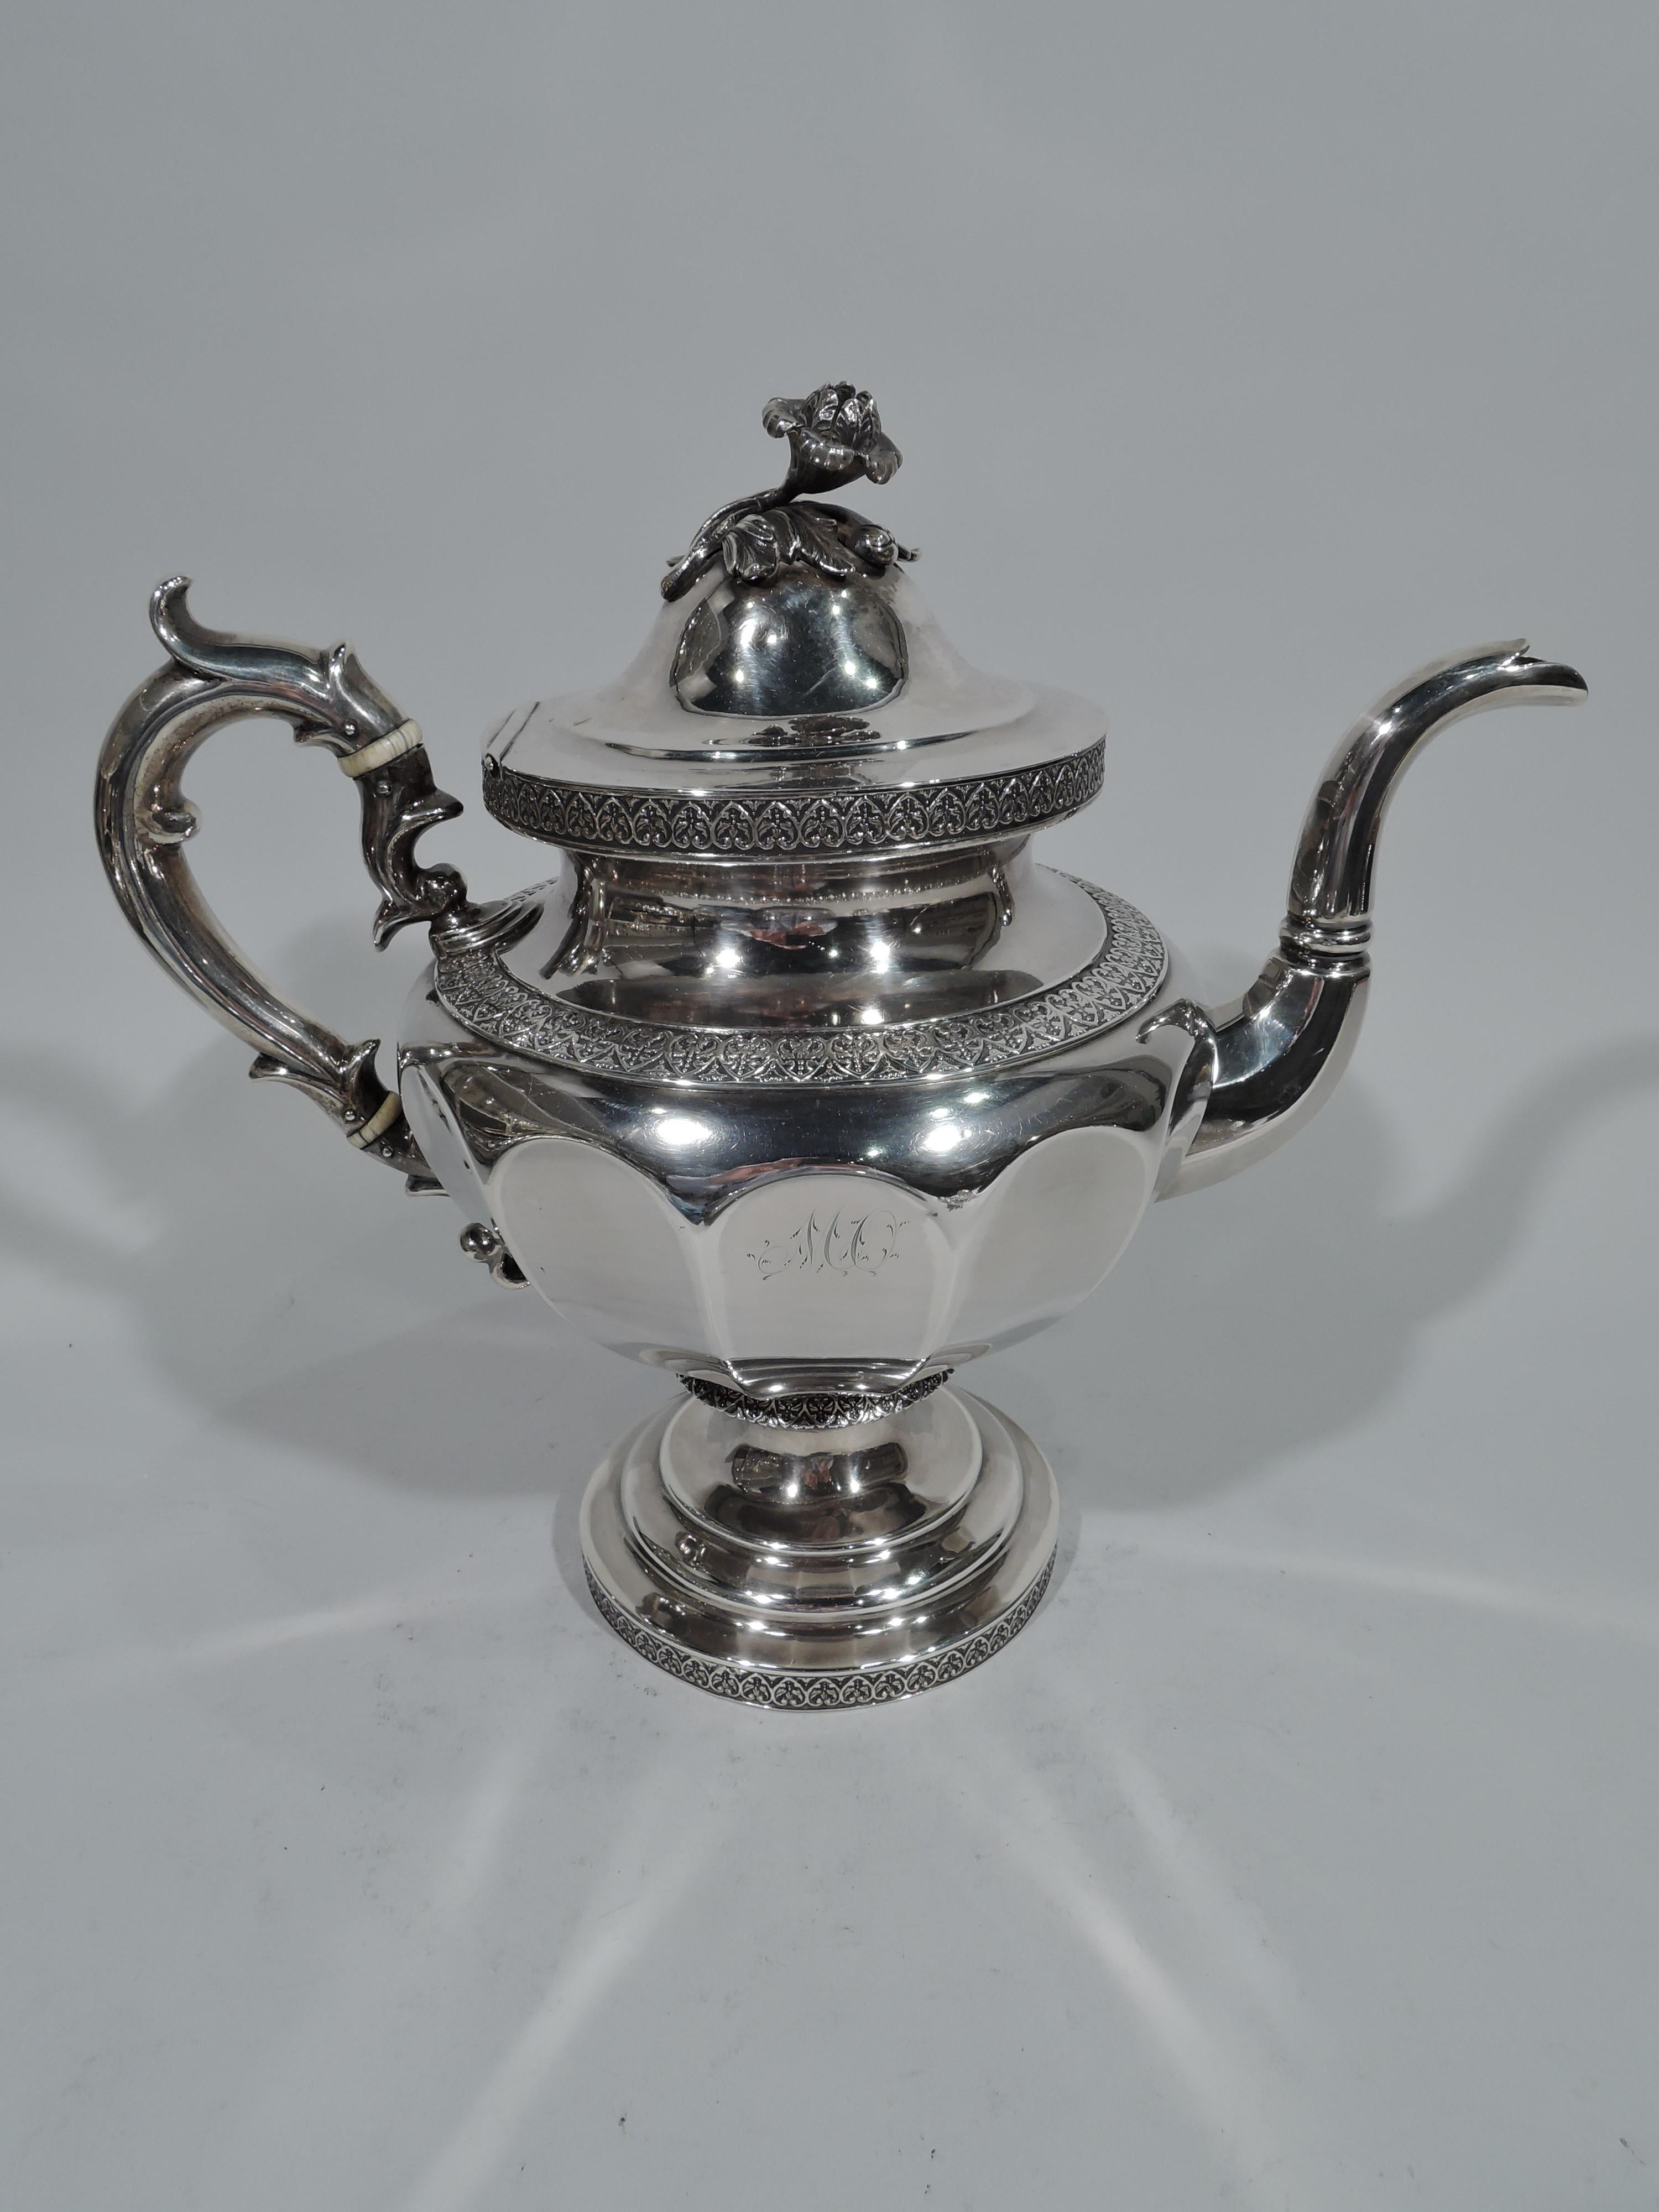 Large and pretty coin silver teapot. Made by William Forbes in New York. Fluted and ovoid body with capped and scrolled handle, faceted s-scroll spout, flange, and stepped foot. Built-in strainer. Cover domed and hinged with flower finial.